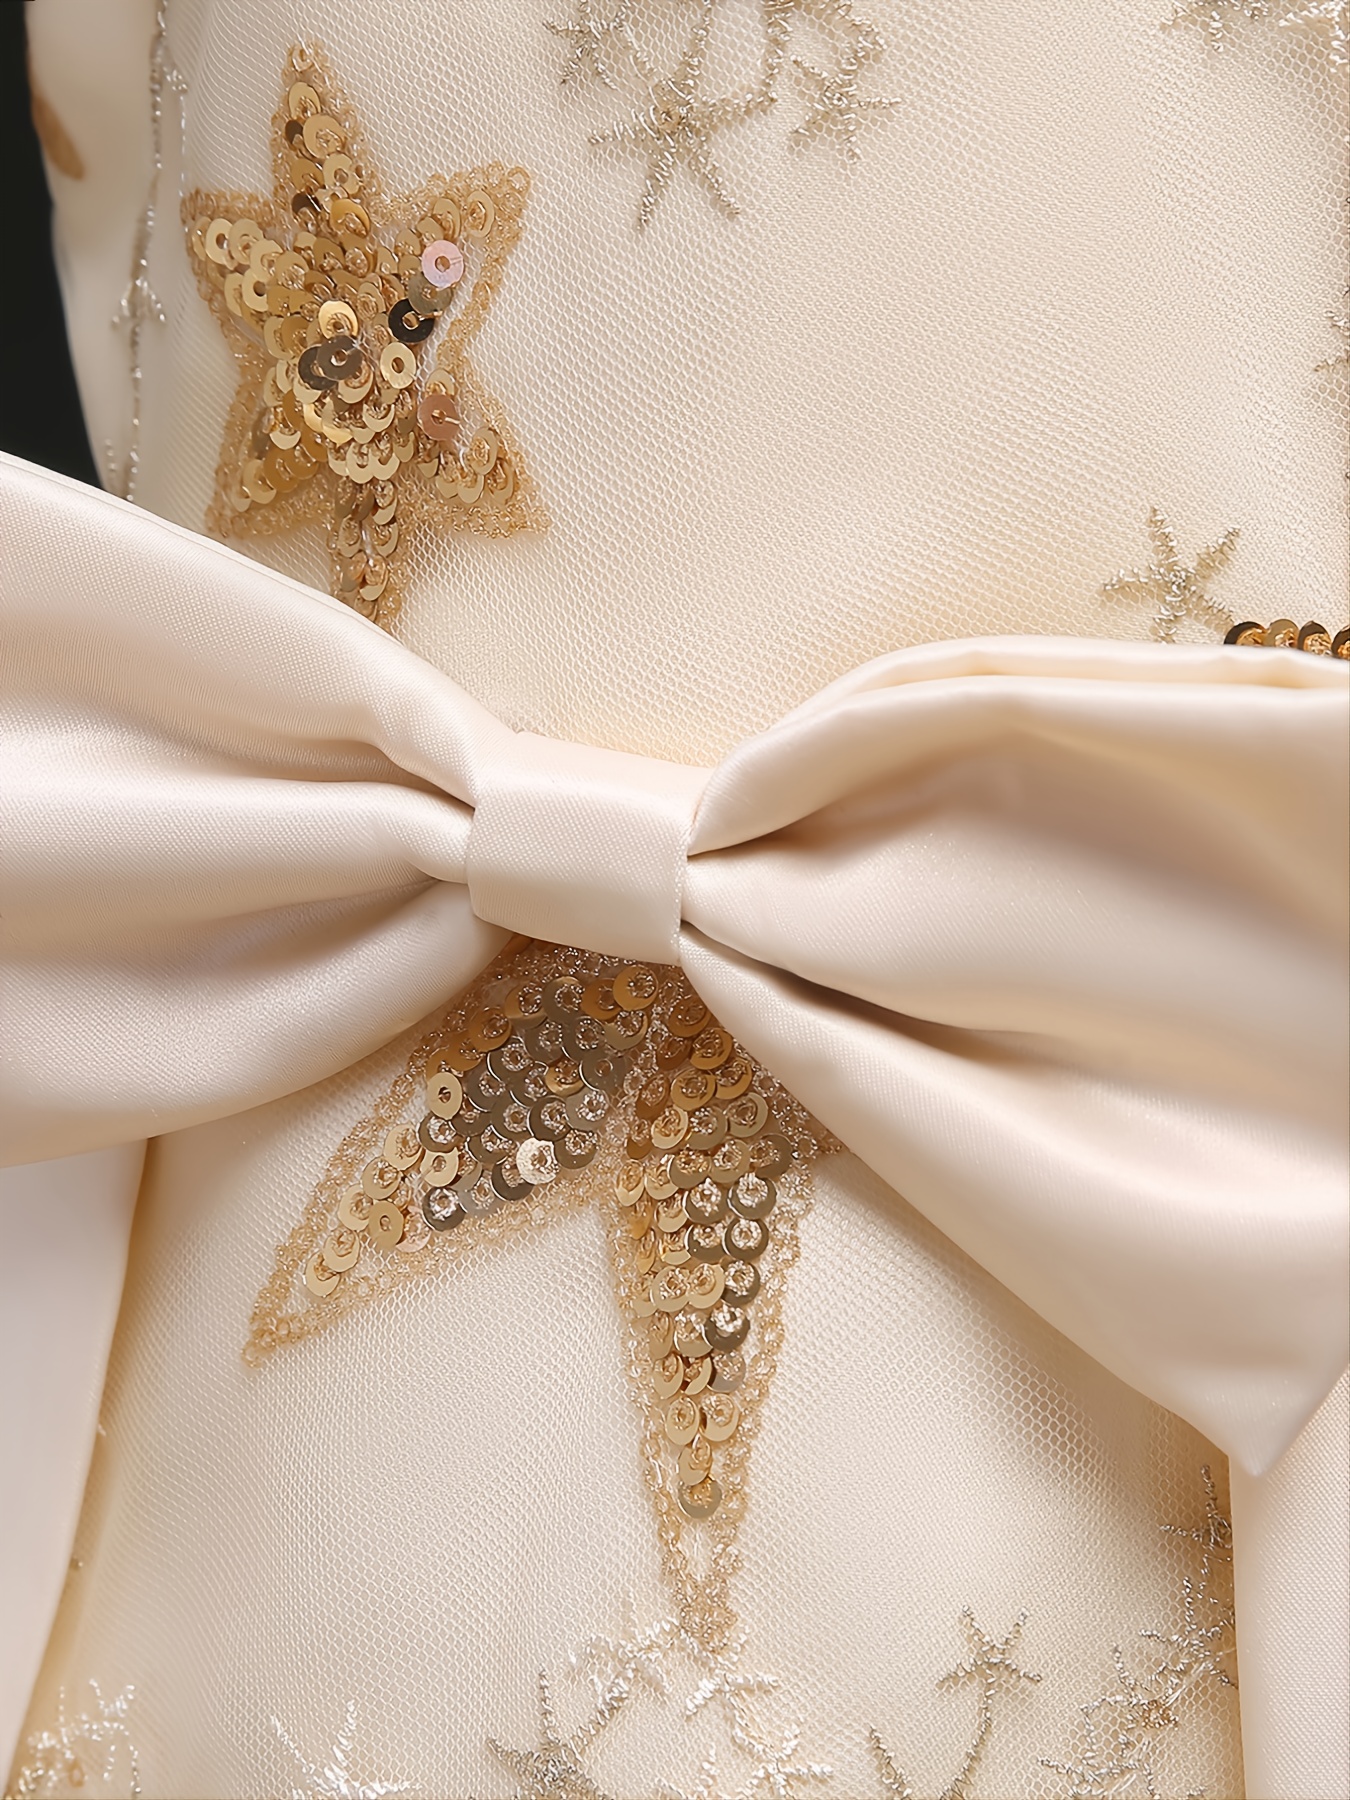 White Frock With Golden Ribbon & Bow